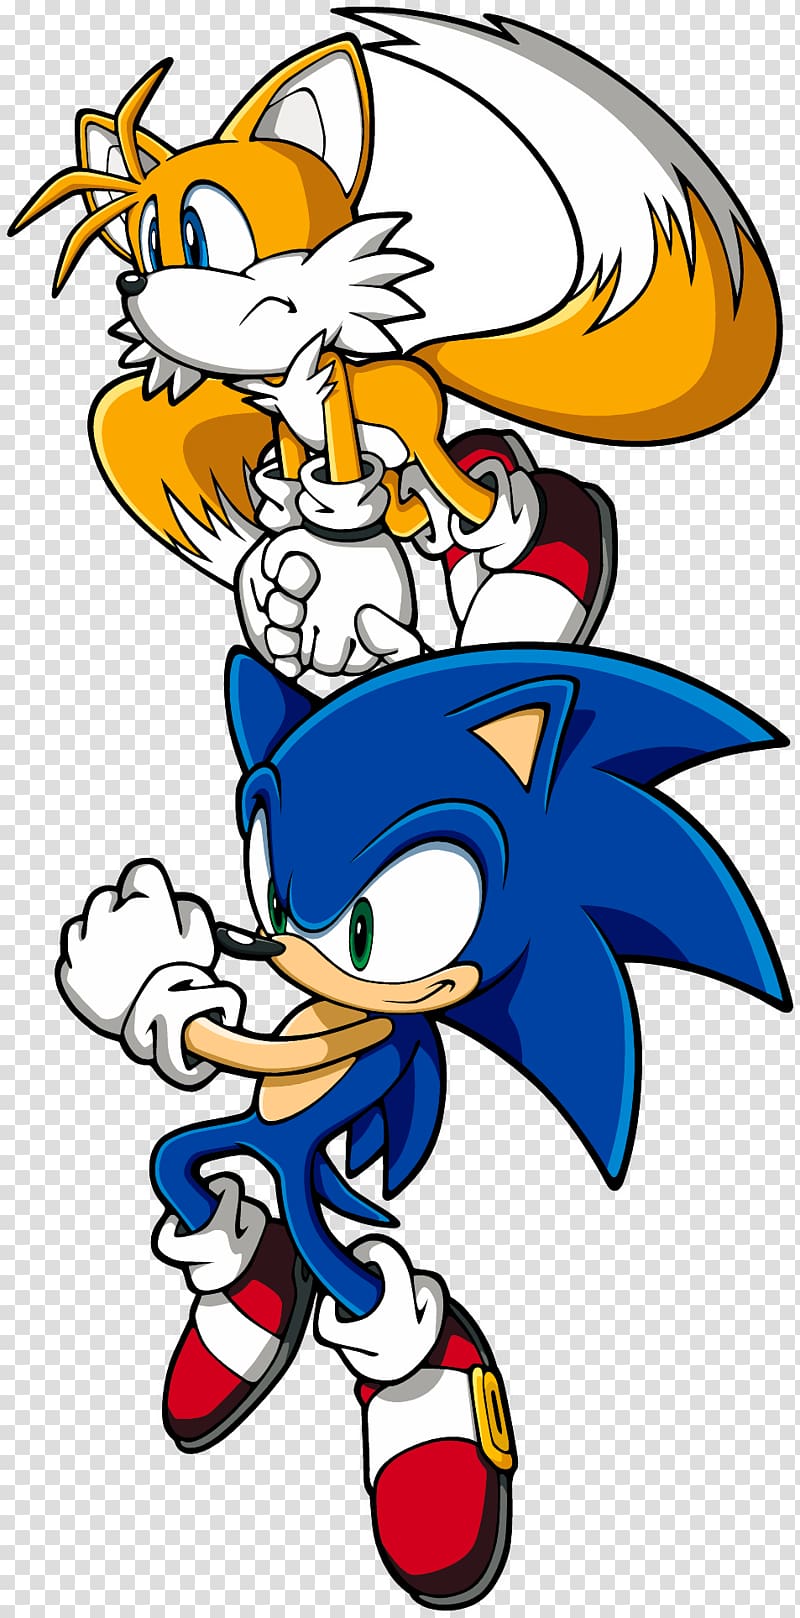 Sonic & Knuckles Sonic the Hedgehog 2 Tails Sonic Advance, Magneto transparent background PNG clipart